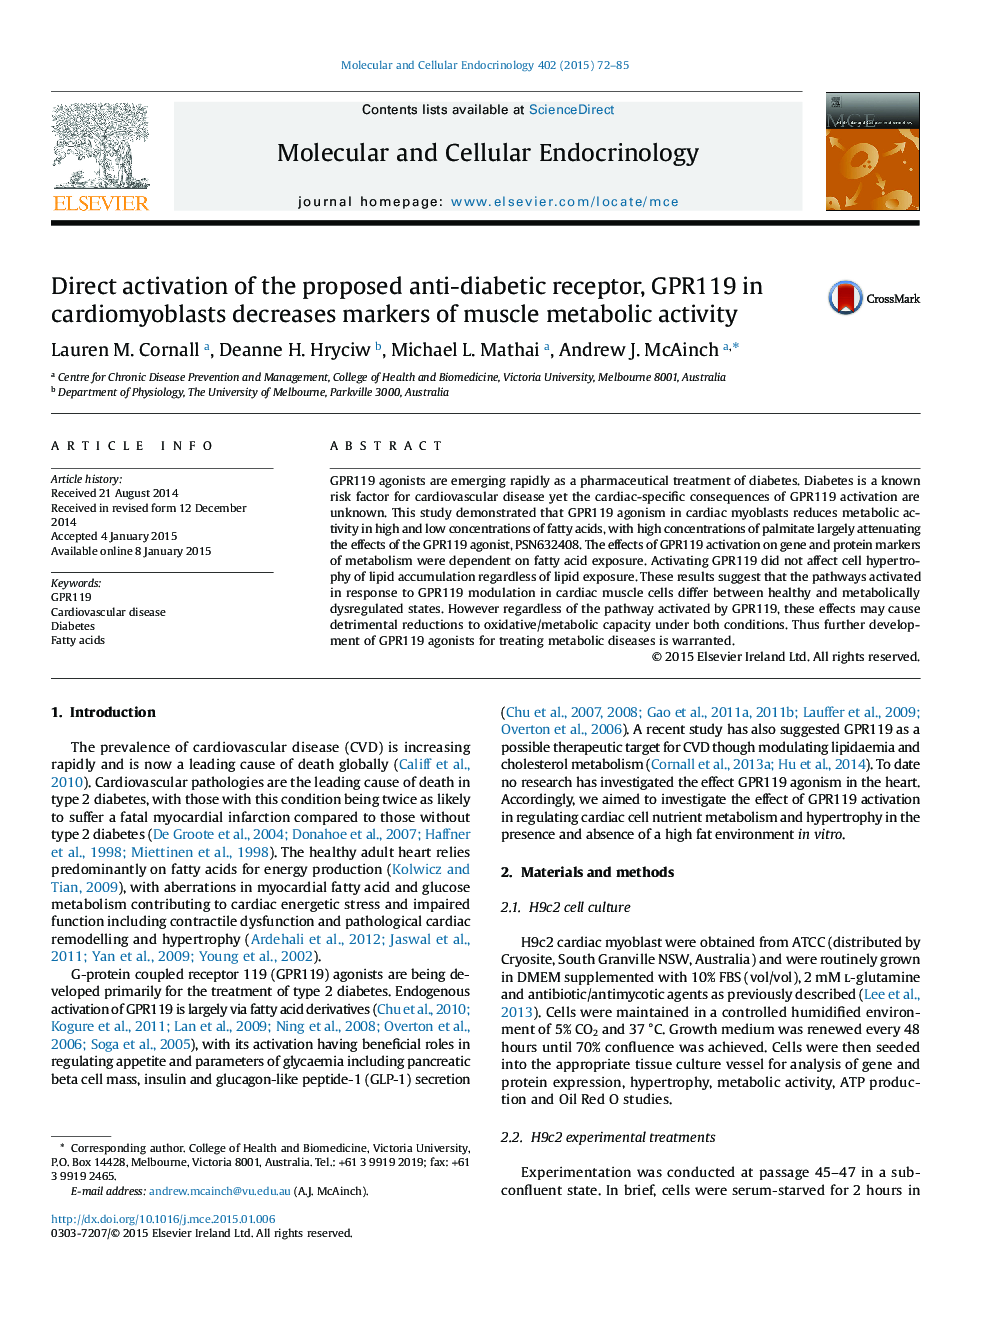 Direct activation of the proposed anti-diabetic receptor, GPR119 in cardiomyoblasts decreases markers of muscle metabolic activity